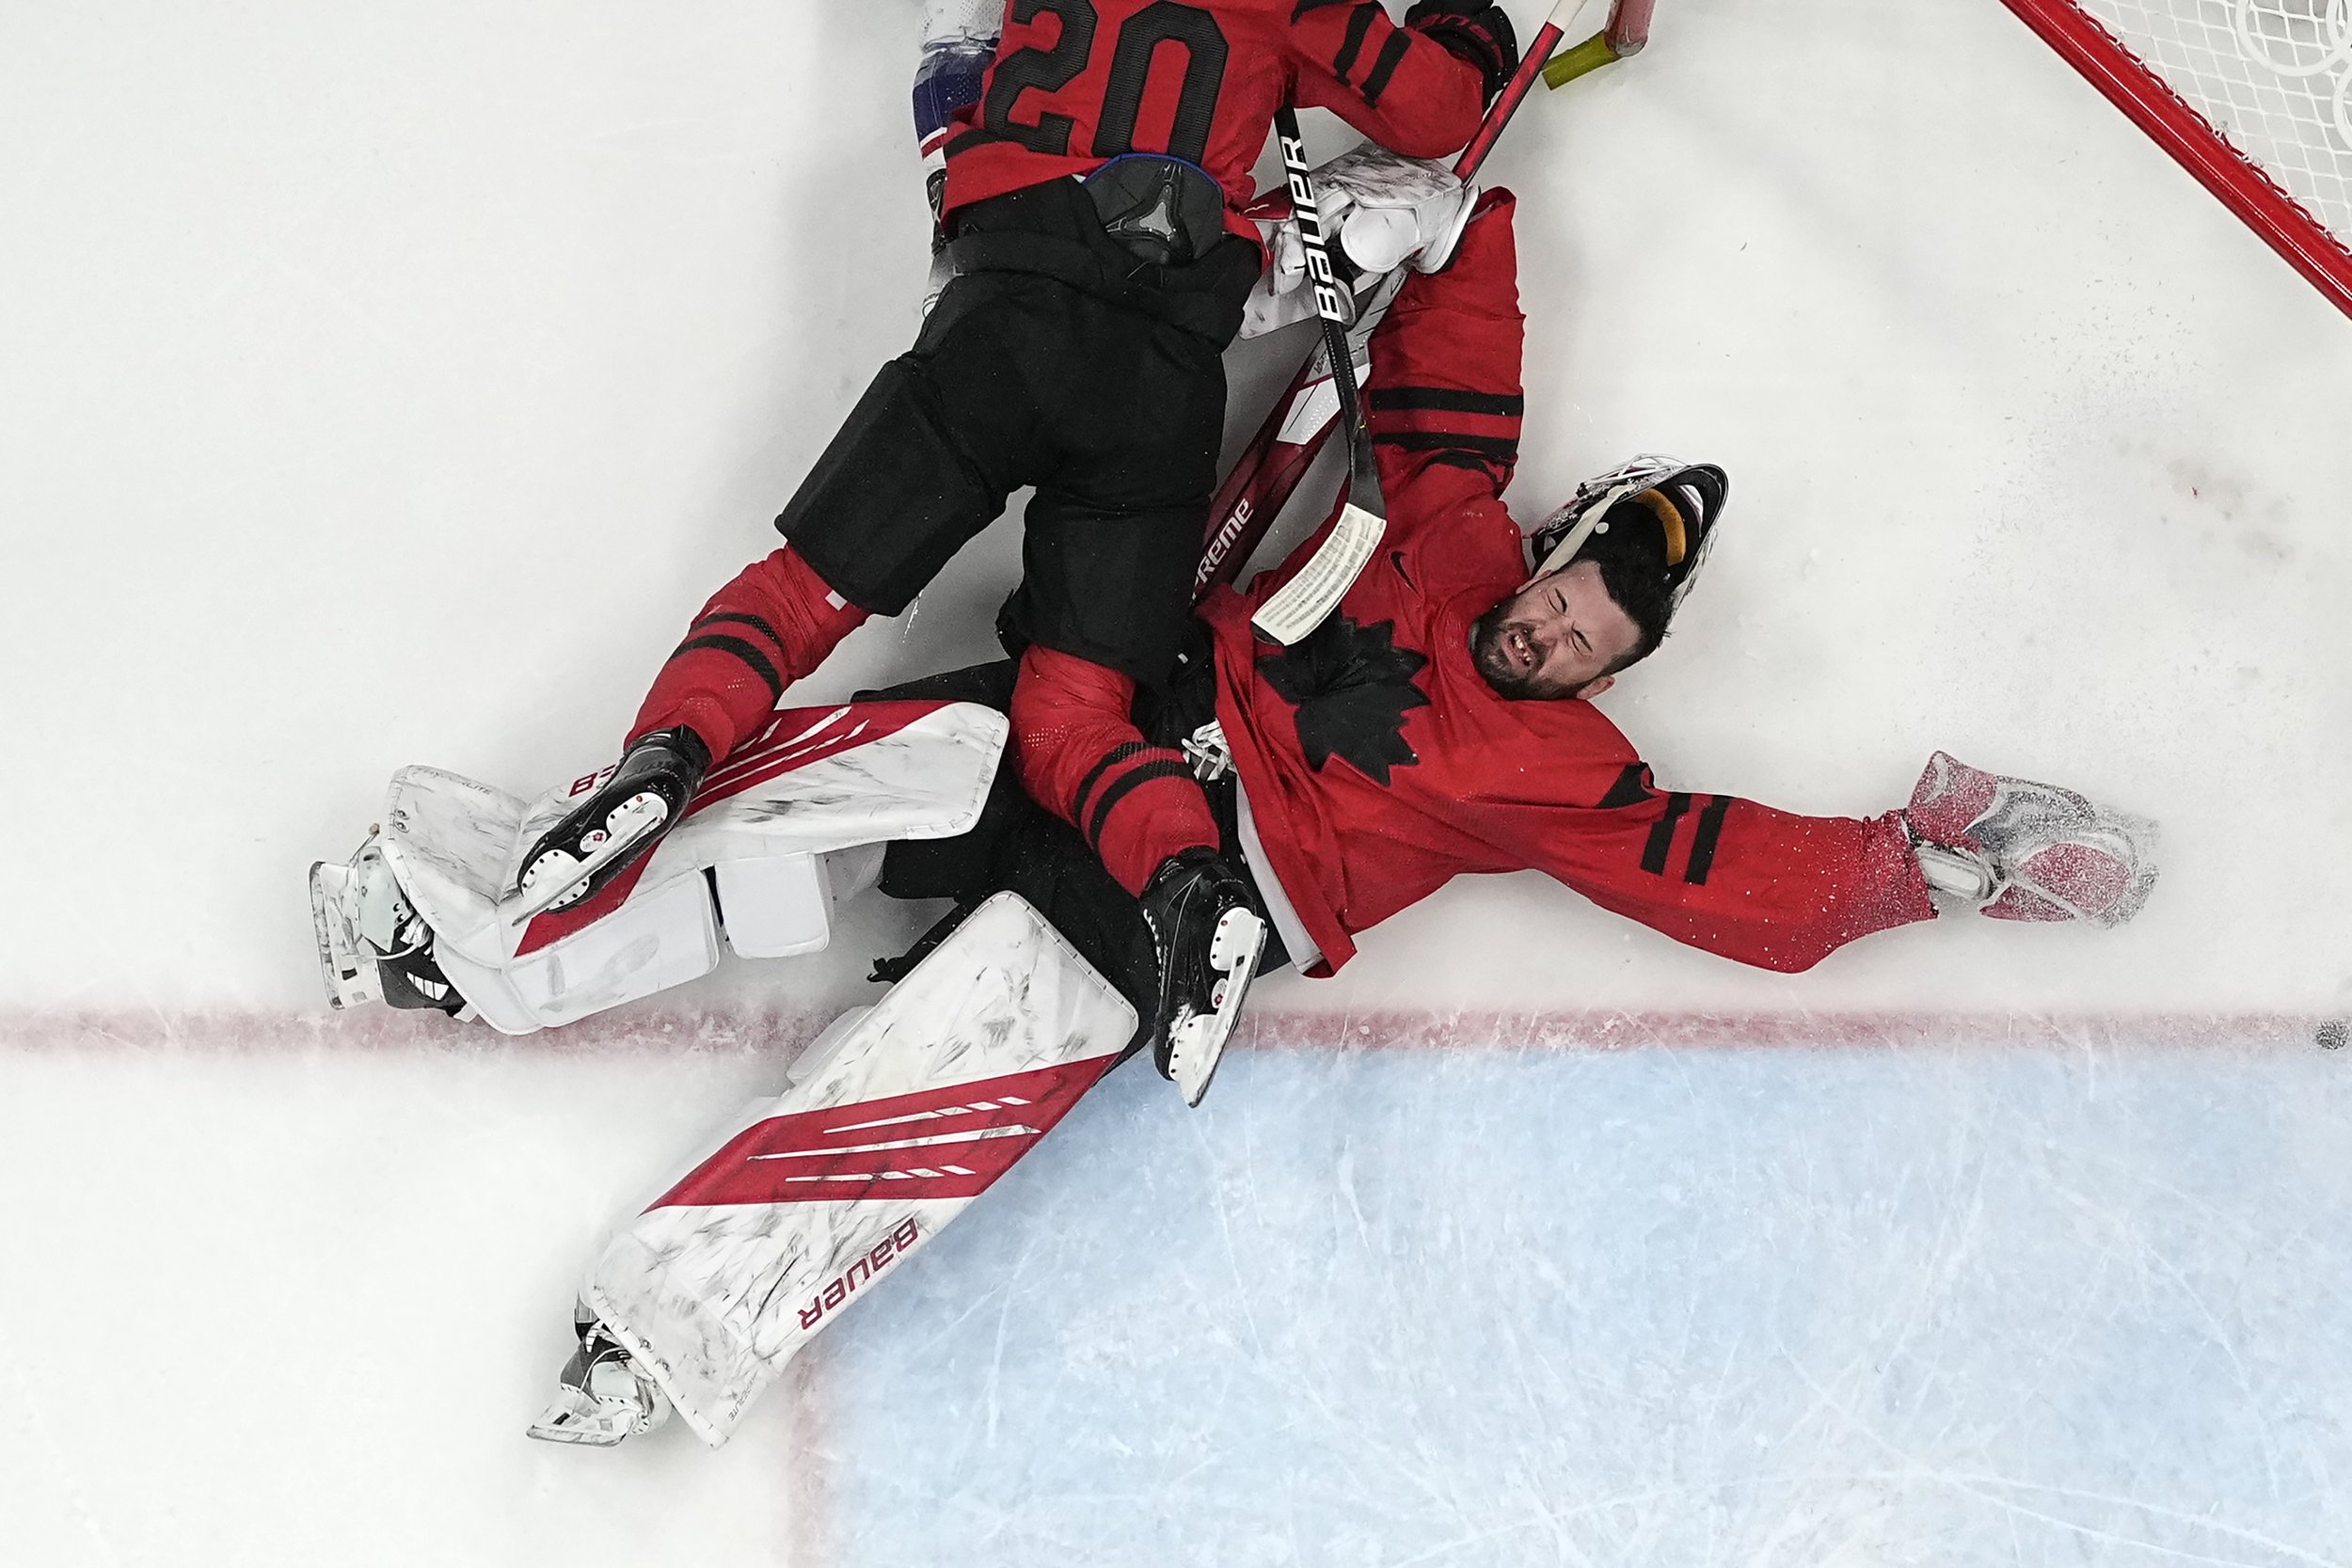  Canada goalkeeper Eddie Pasquale is knocked down by teammate Alex Grant (20) during a preliminary round men's hockey game against the United States at the 2022 Winter Olympics, Saturday, Feb. 12, 2022, in Beijing. (AP Photo/Matt Slocum) 